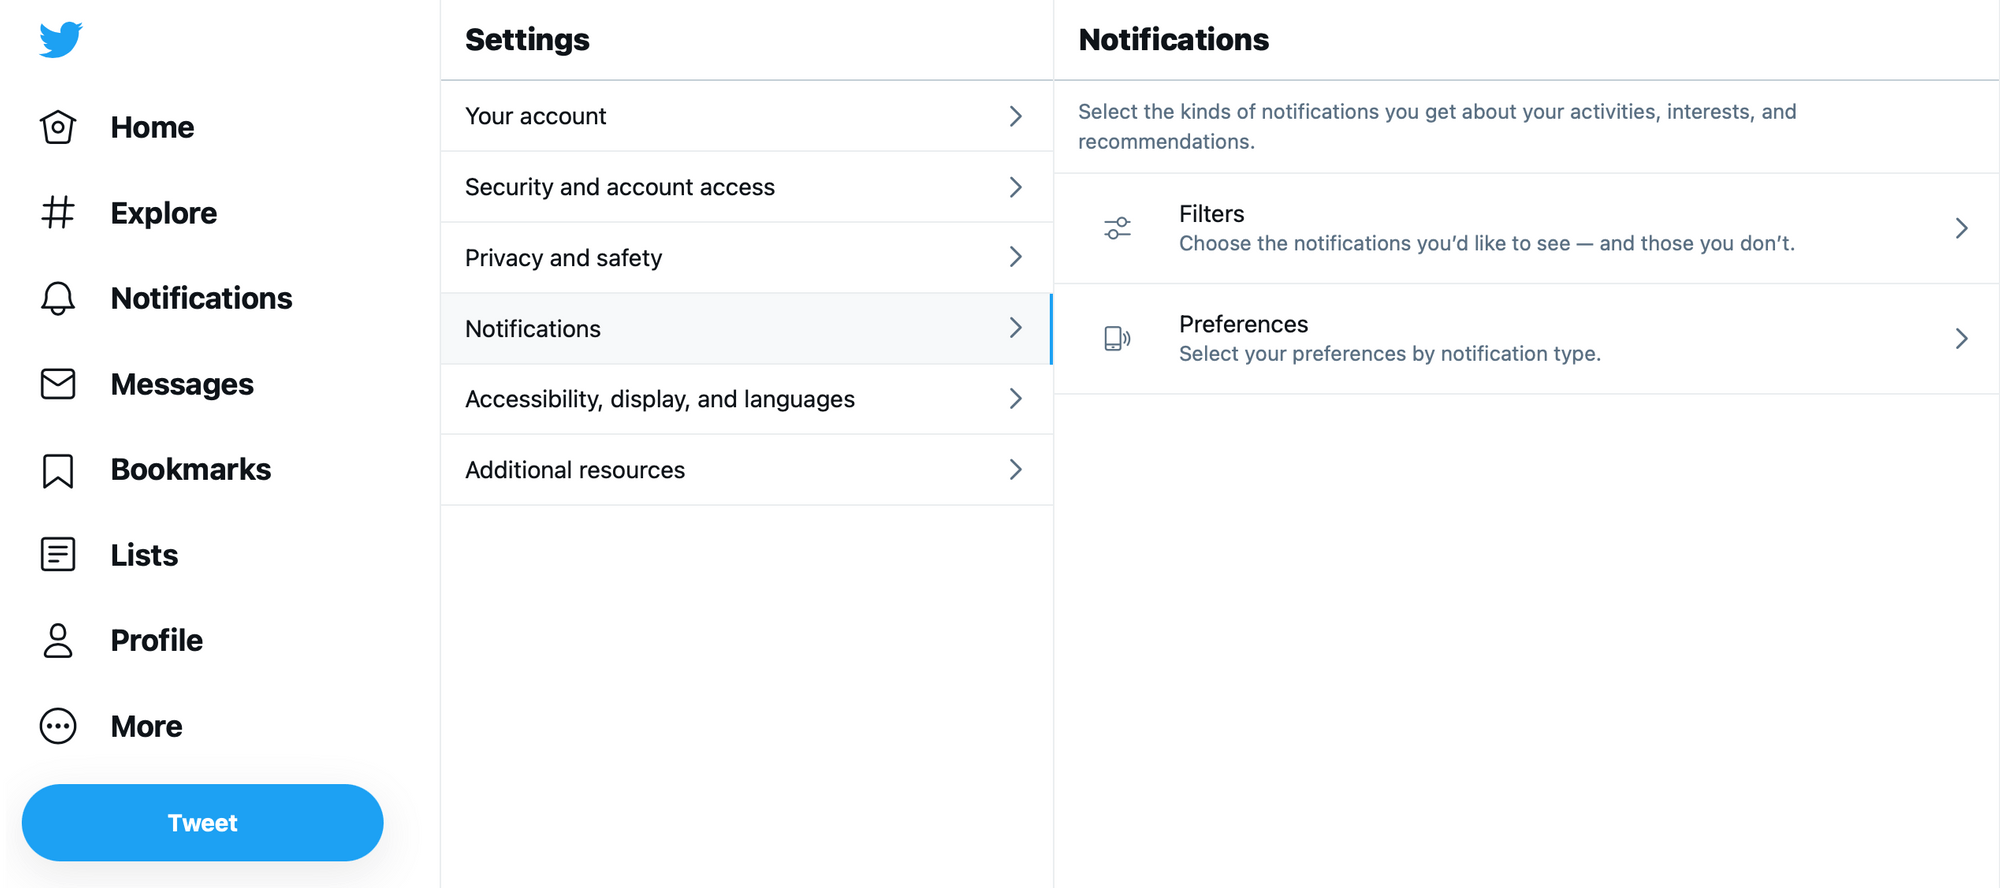 Quality filter: Notifications>Setting (cog)>Notifications>Filters>Quality Filter